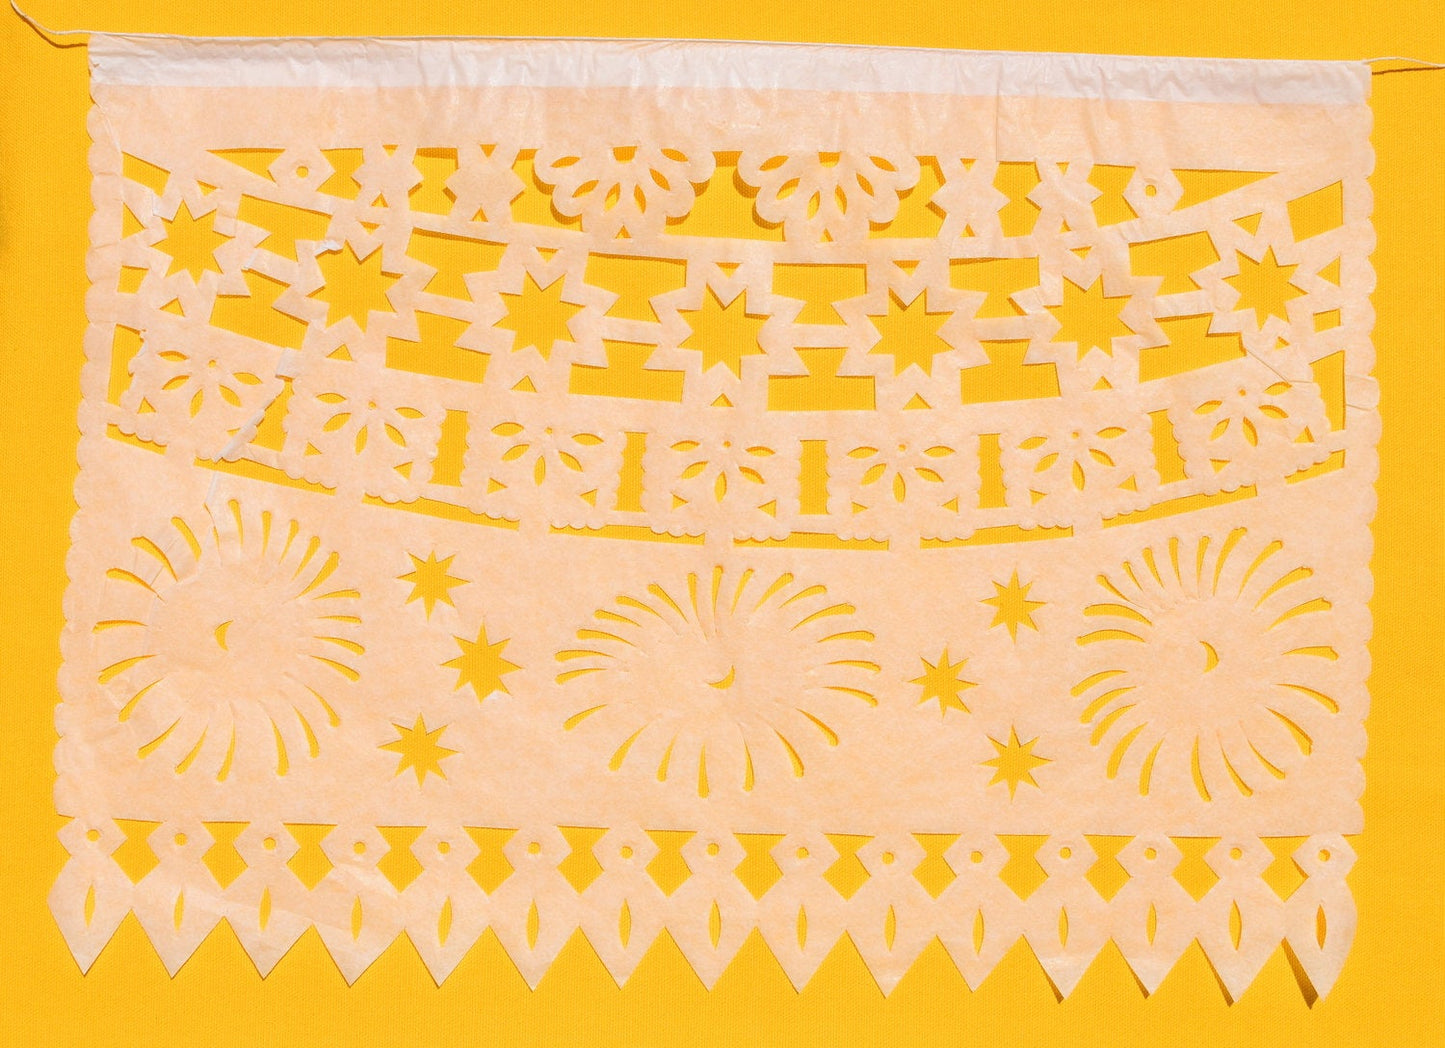 Mexican Wedding Papel Picado Bunting Decorations | Custom Made Lengths To Fit Your Venue Perfectly - ARTMEXICO